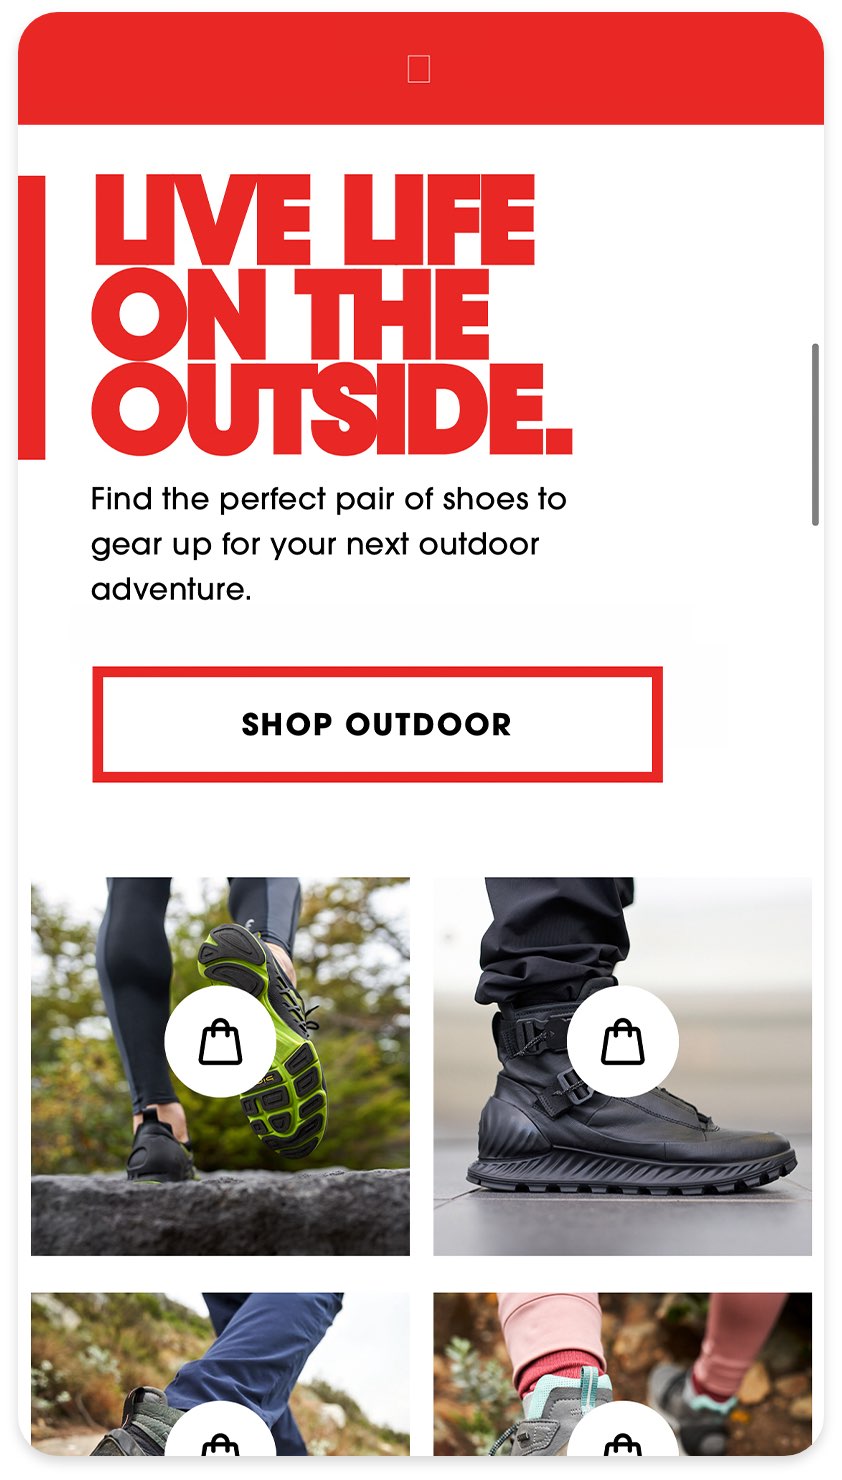 shot from the ecco website, mobile version with red text that reads "live life on the outside" and a button that reads "shop outdoor". There are various images of shoes below that.